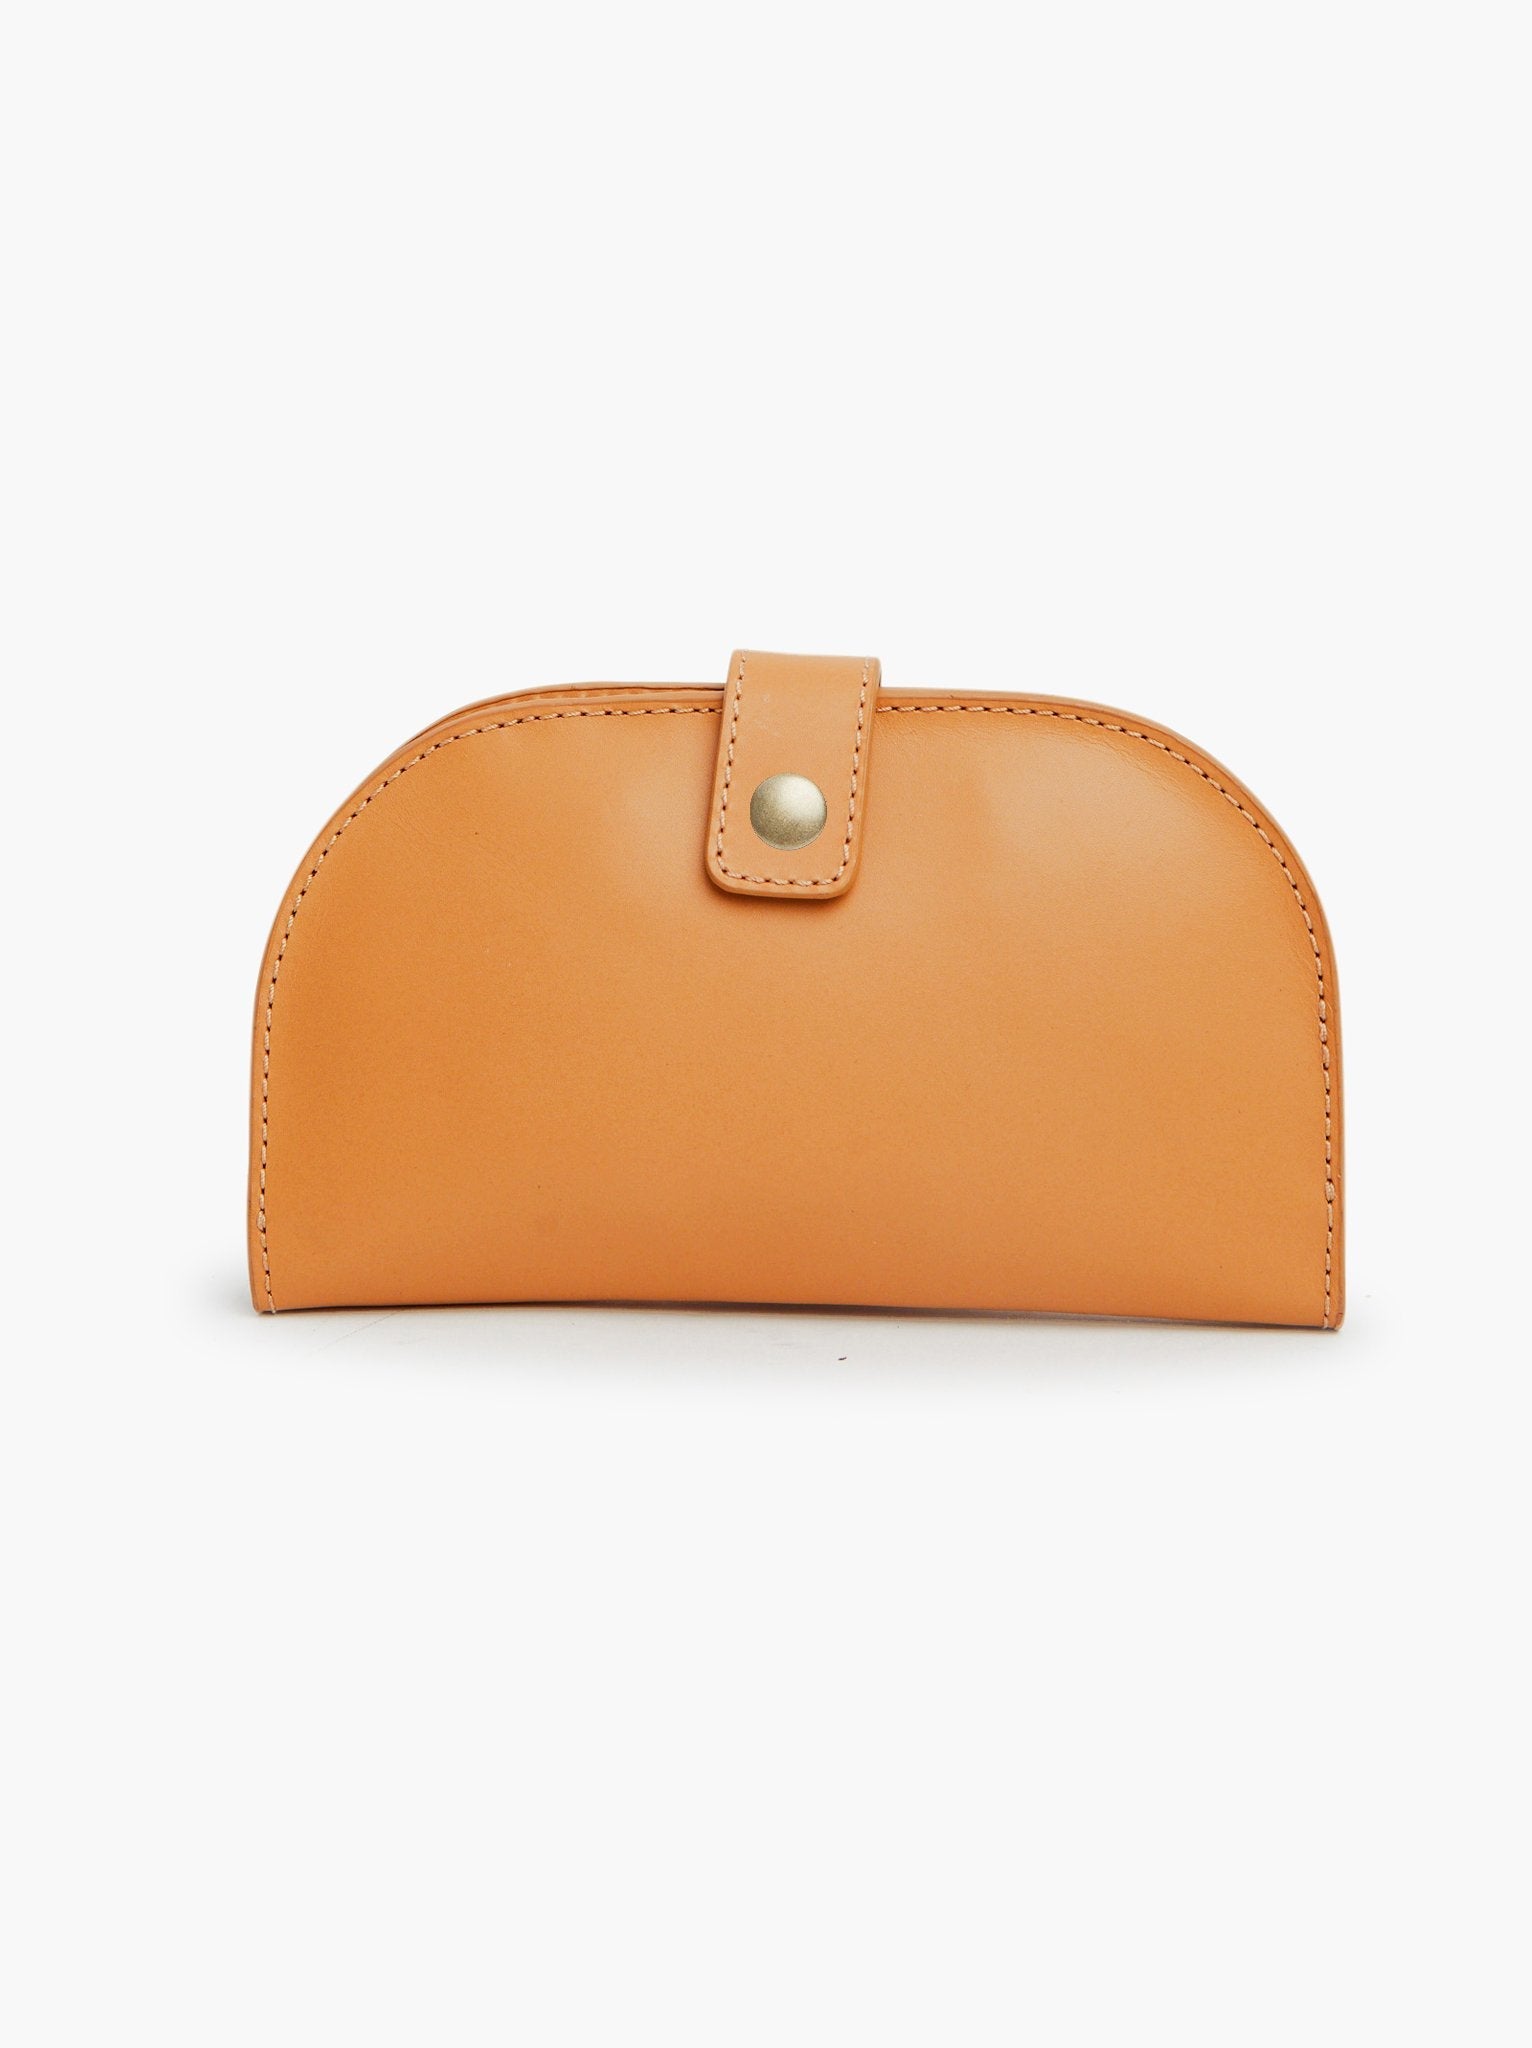 Able Marisol Wallet - Provisions Mercantile